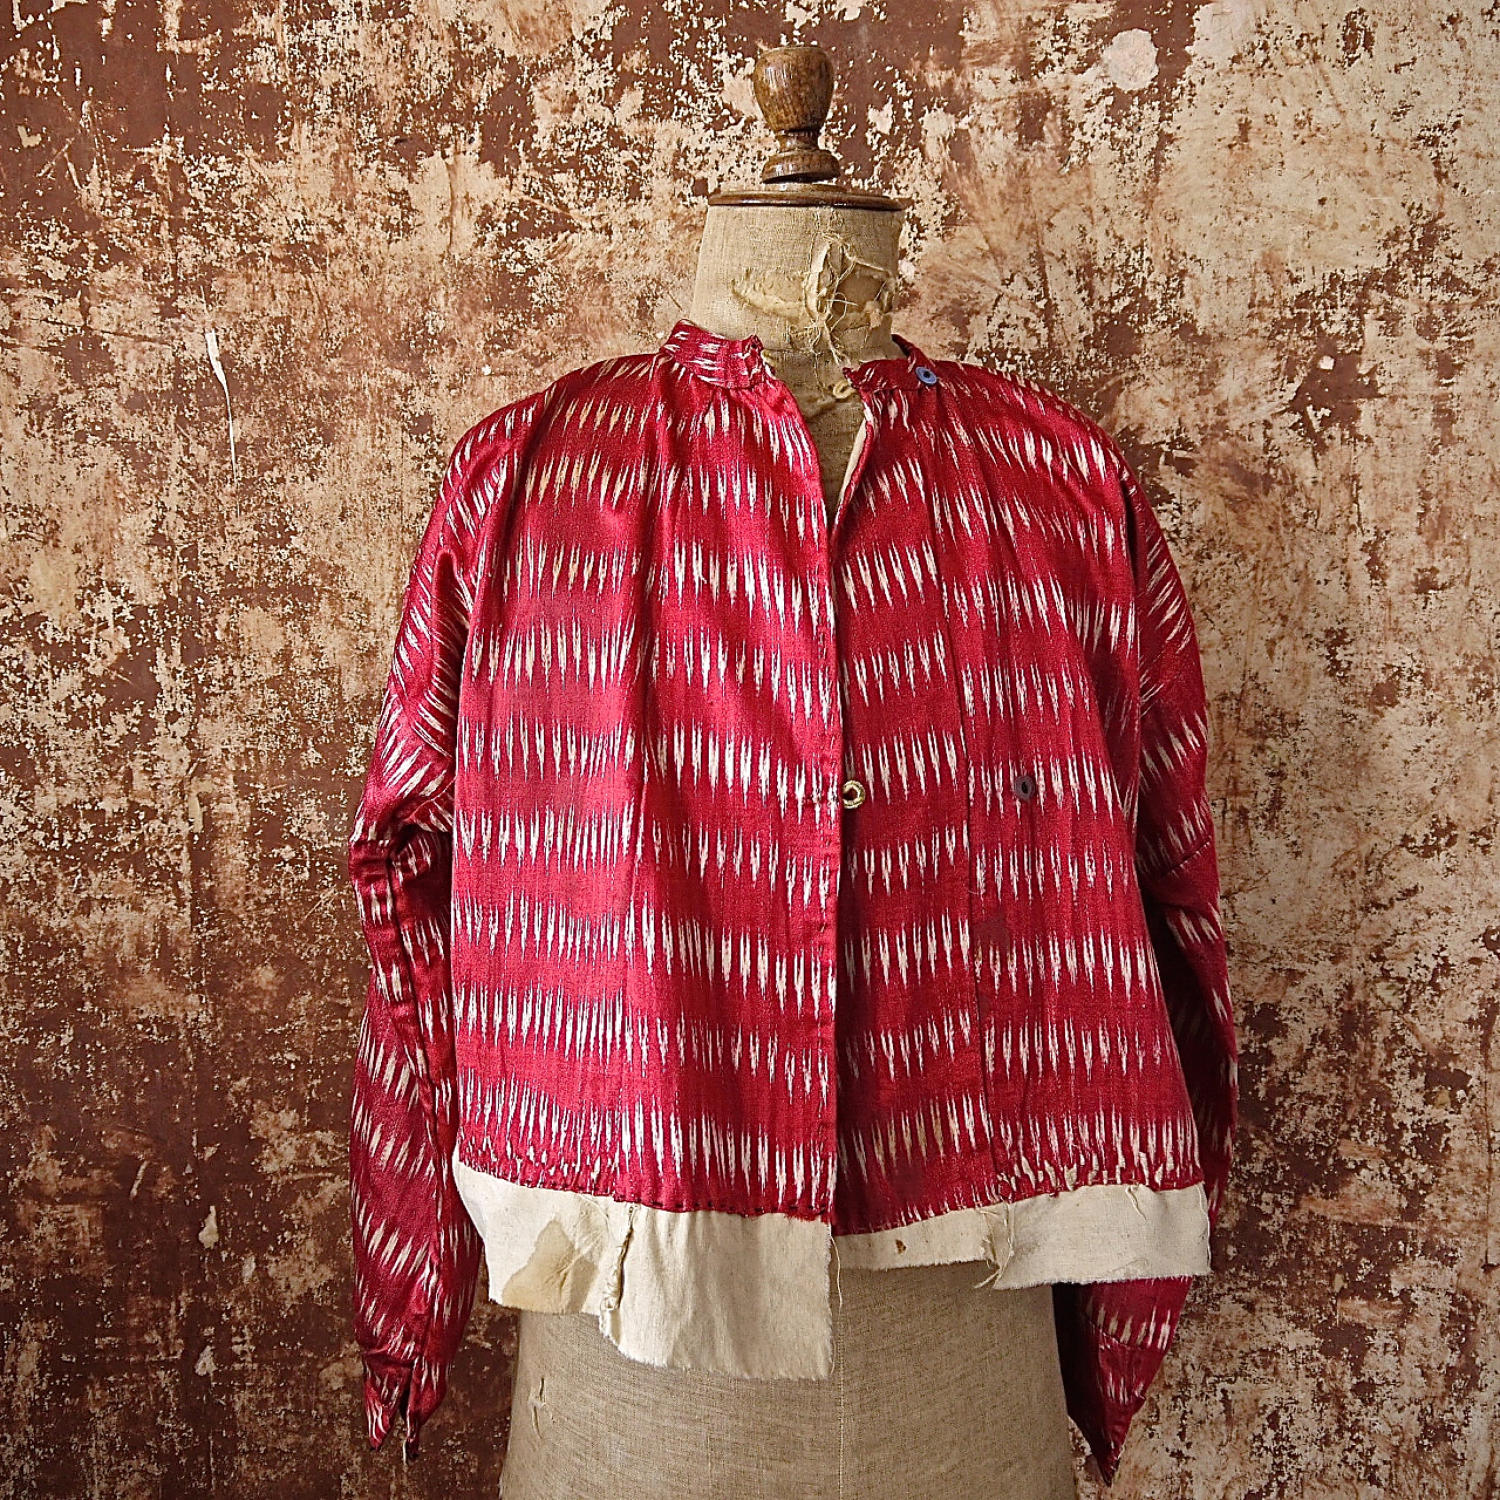 Early 20th century Aleppo red silk ikat jacket